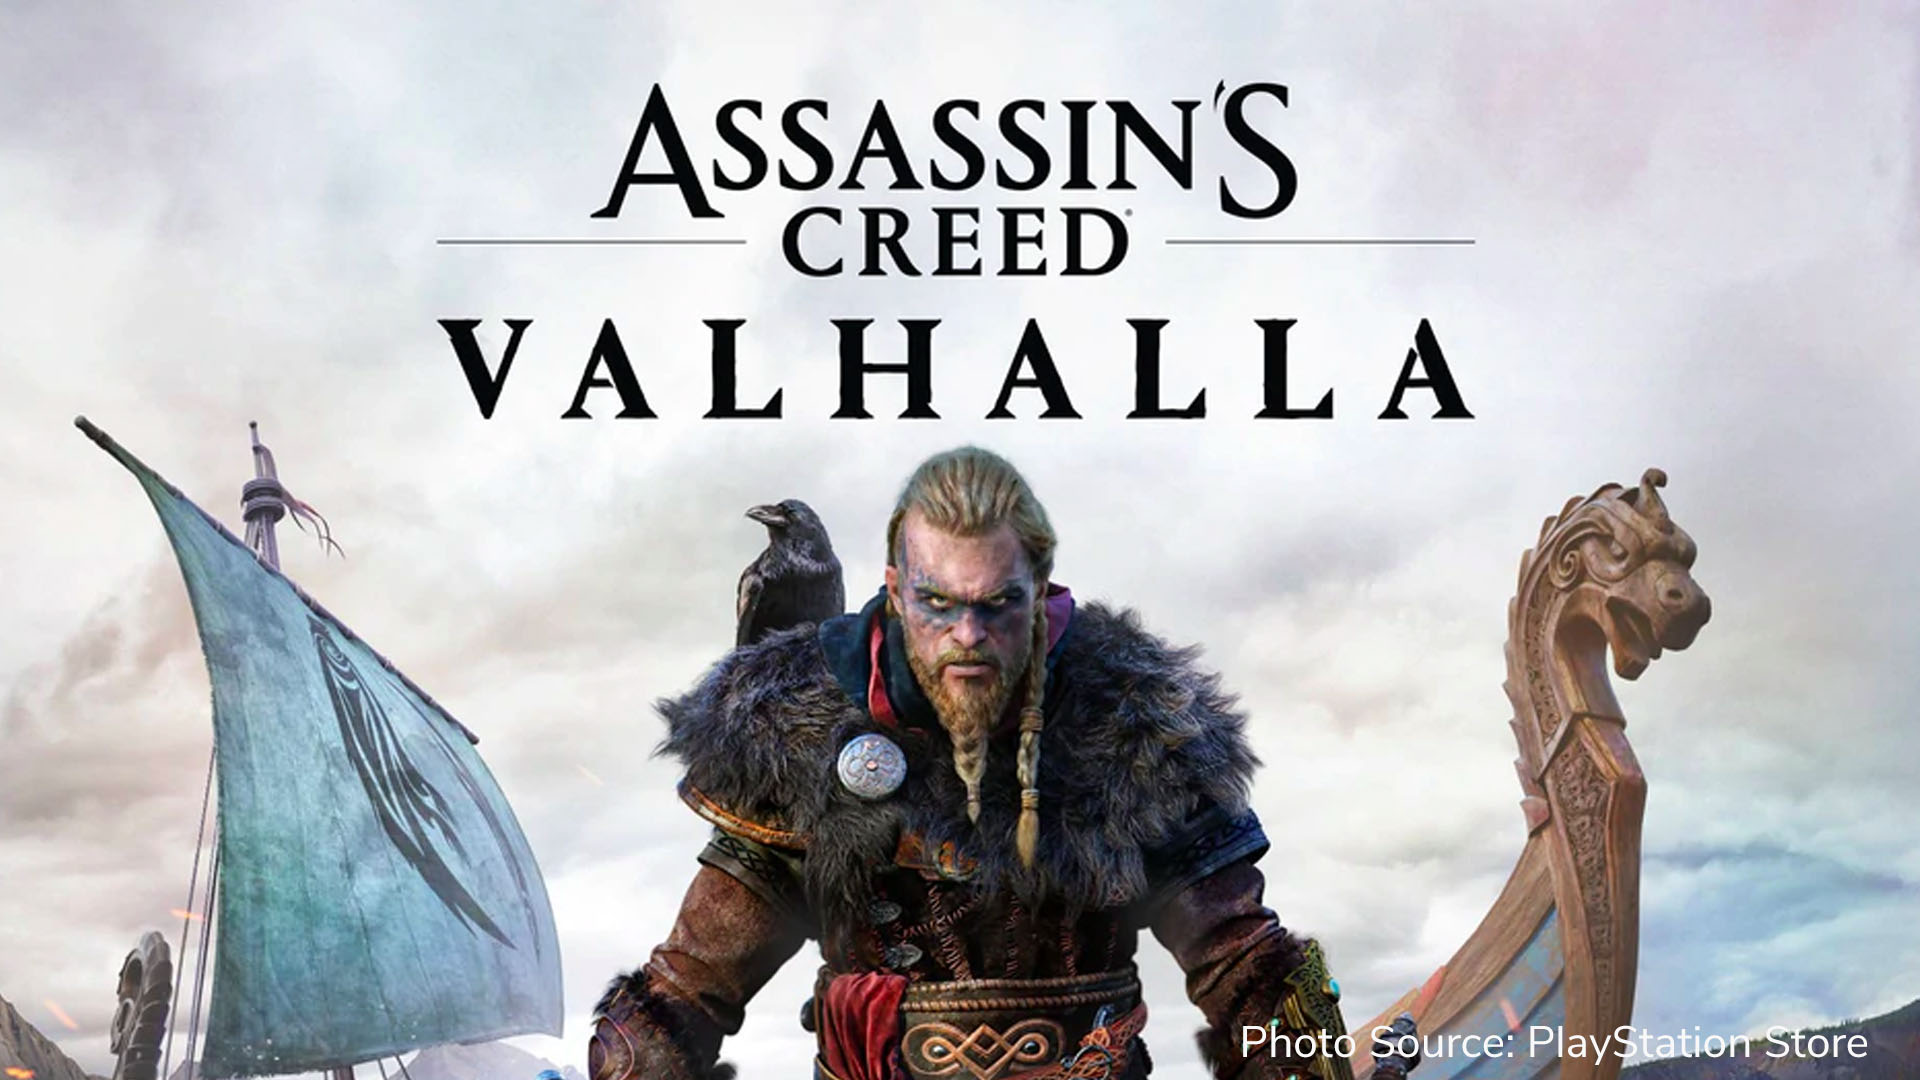 Assassin’s Creed author name drops Malta as possible setting